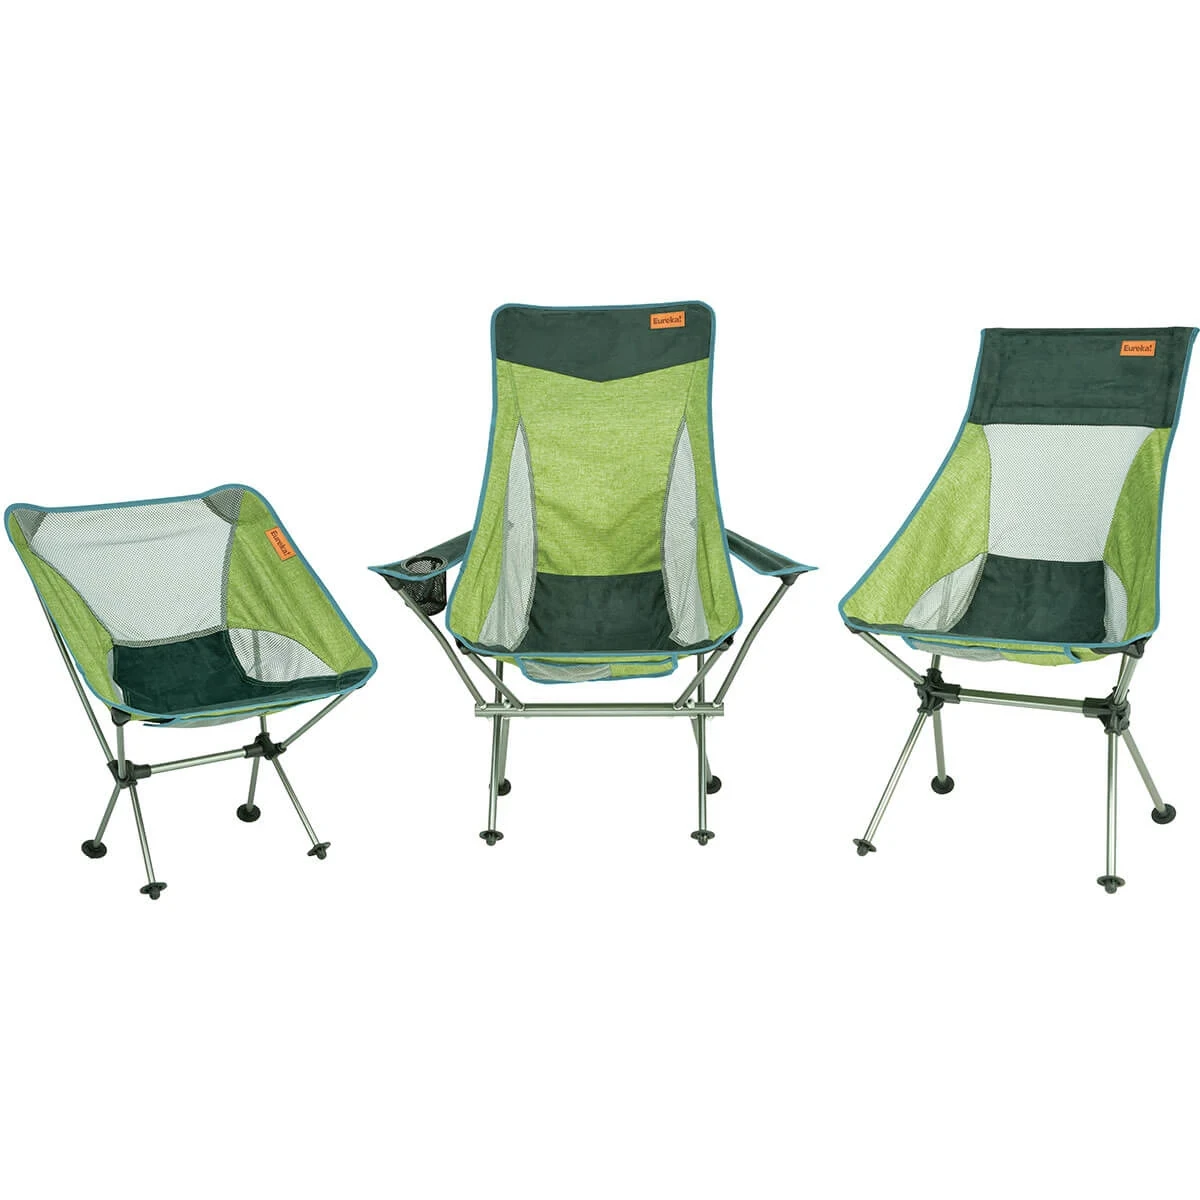 Collection of the 3 Eureka! Tagalong Camp Chairs